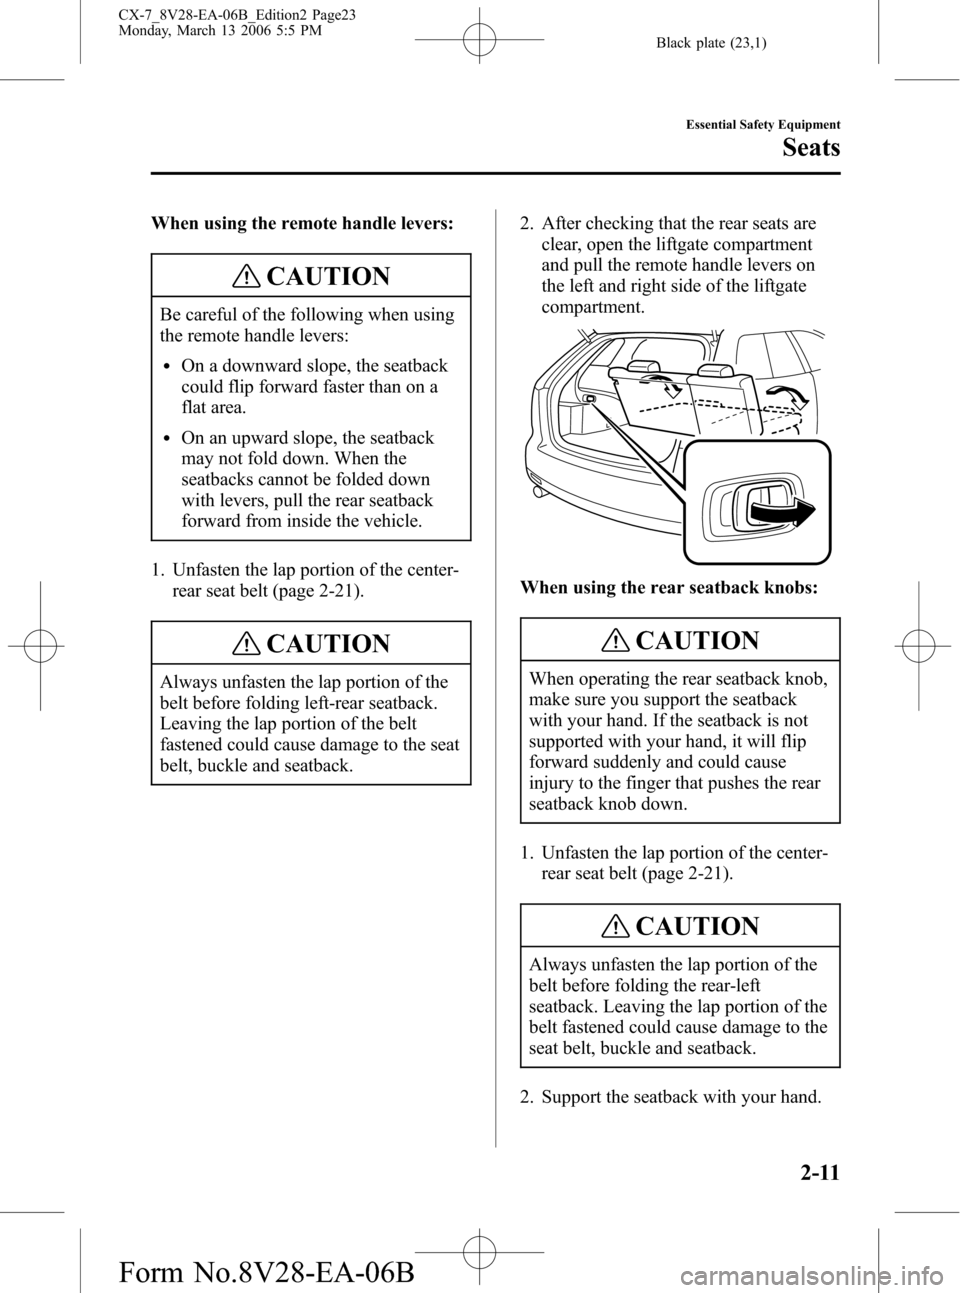 MAZDA MODEL CX-7 2007   (in English) Owners Manual Black plate (23,1)
When using the remote handle levers:
CAUTION
Be careful of the following when using
the remote handle levers:
lOn a downward slope, the seatback
could flip forward faster than on a
